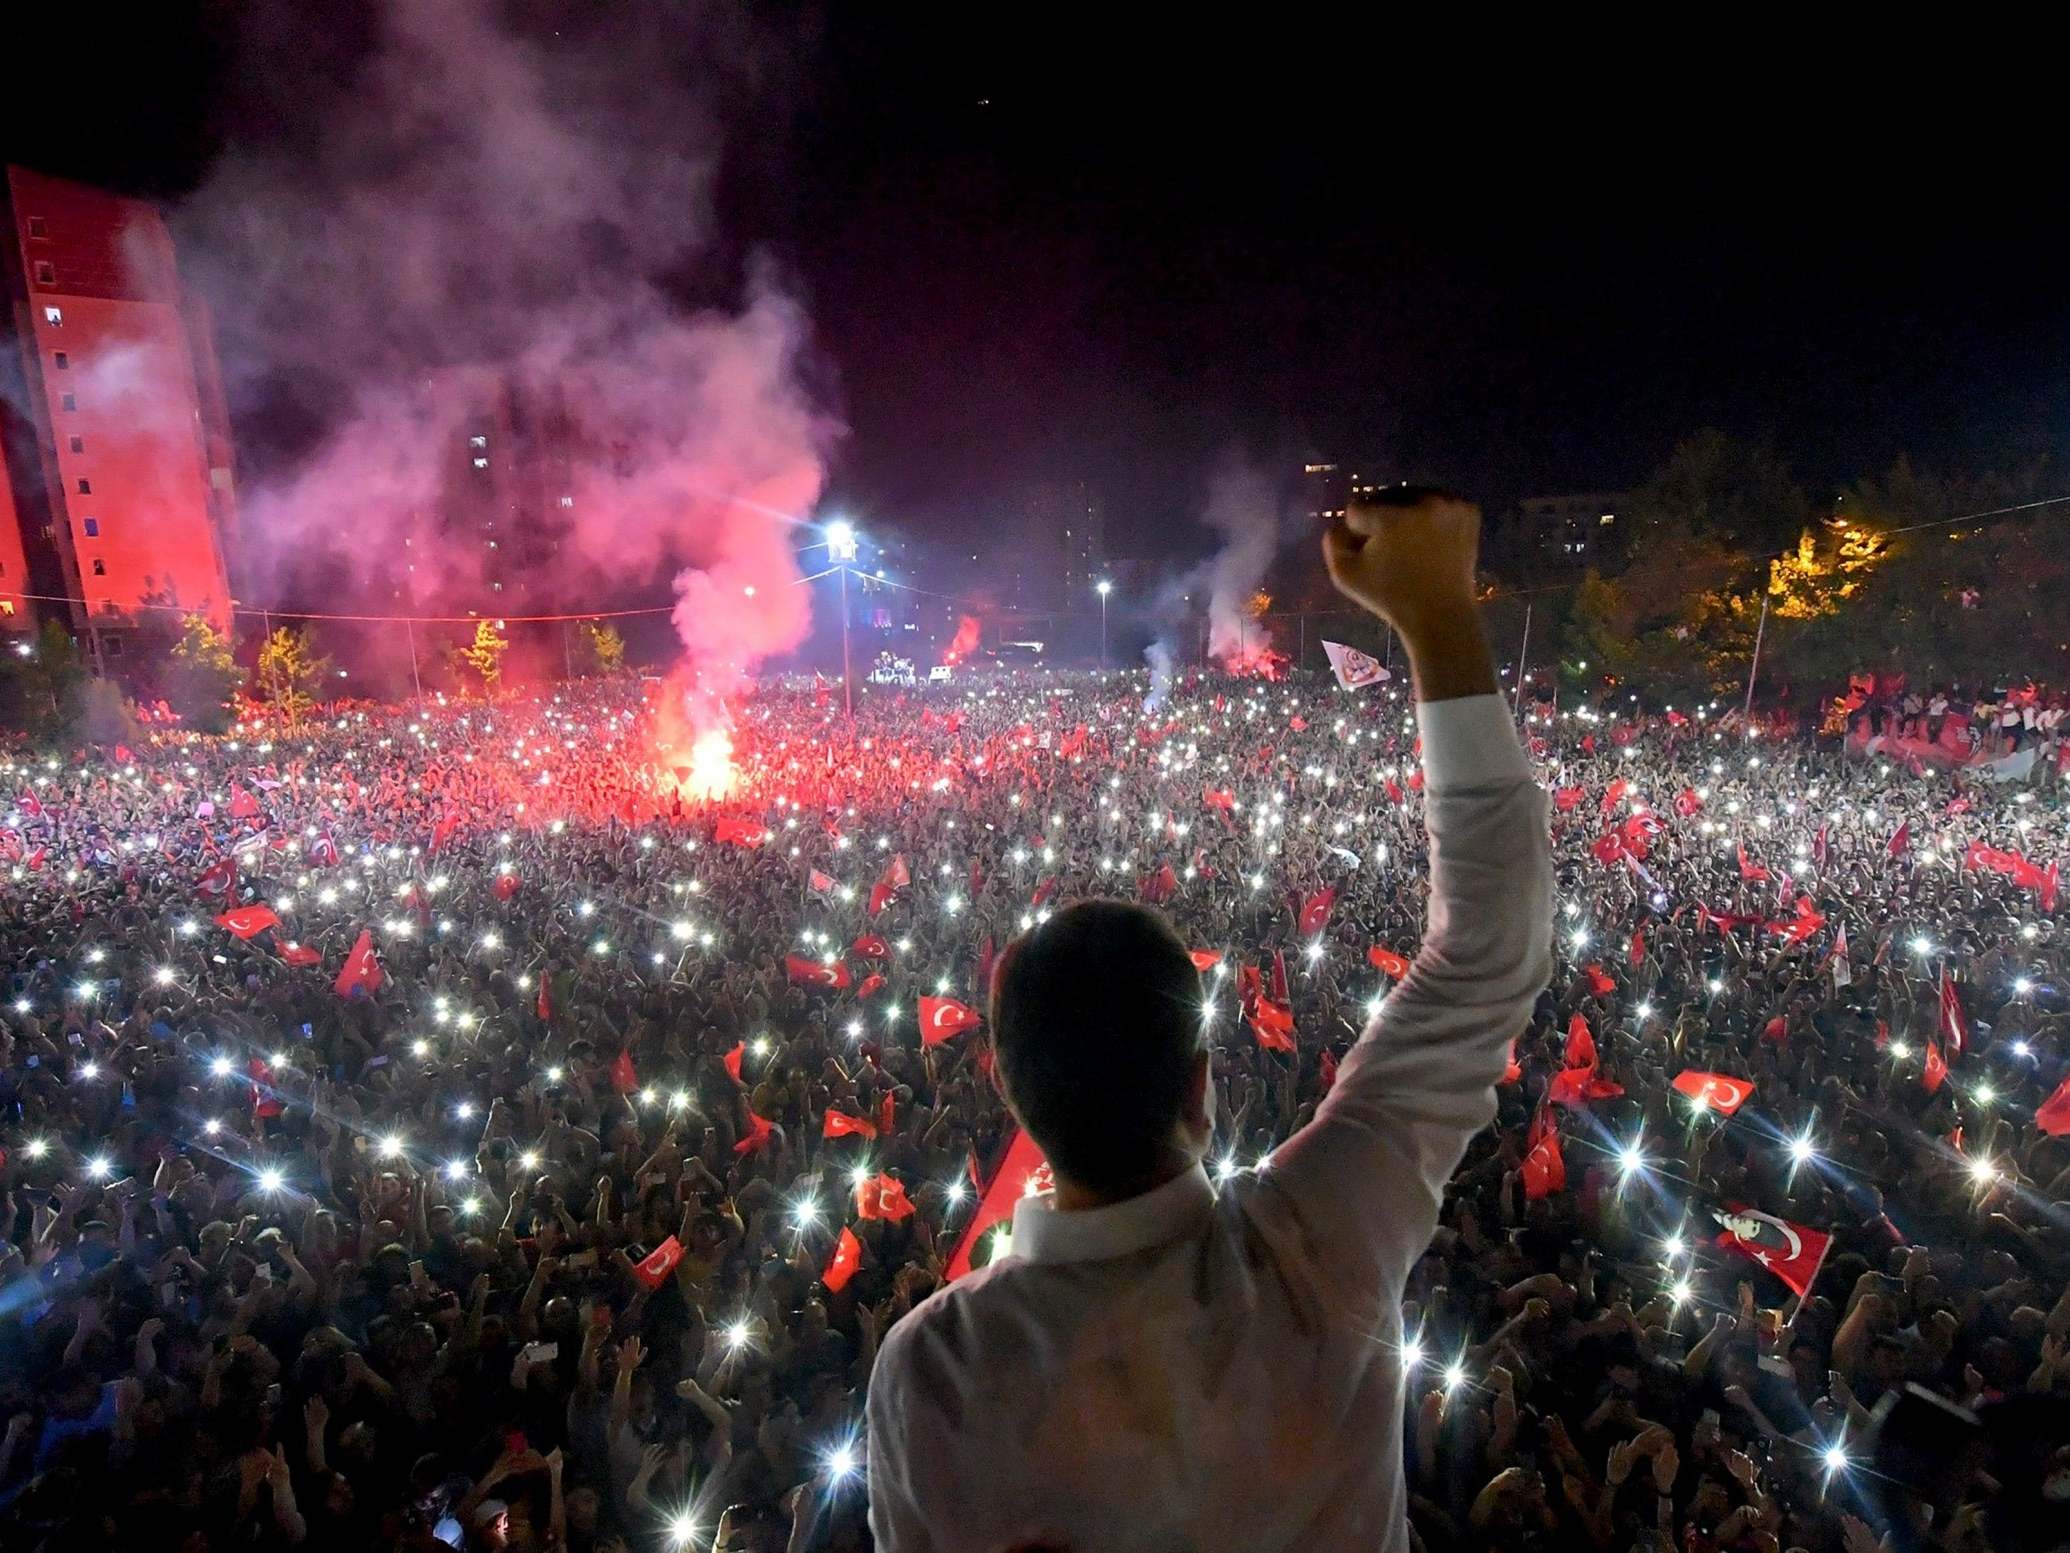 Imamoglu celebrates in front of thousands of supporters in Istanbul after winning the election